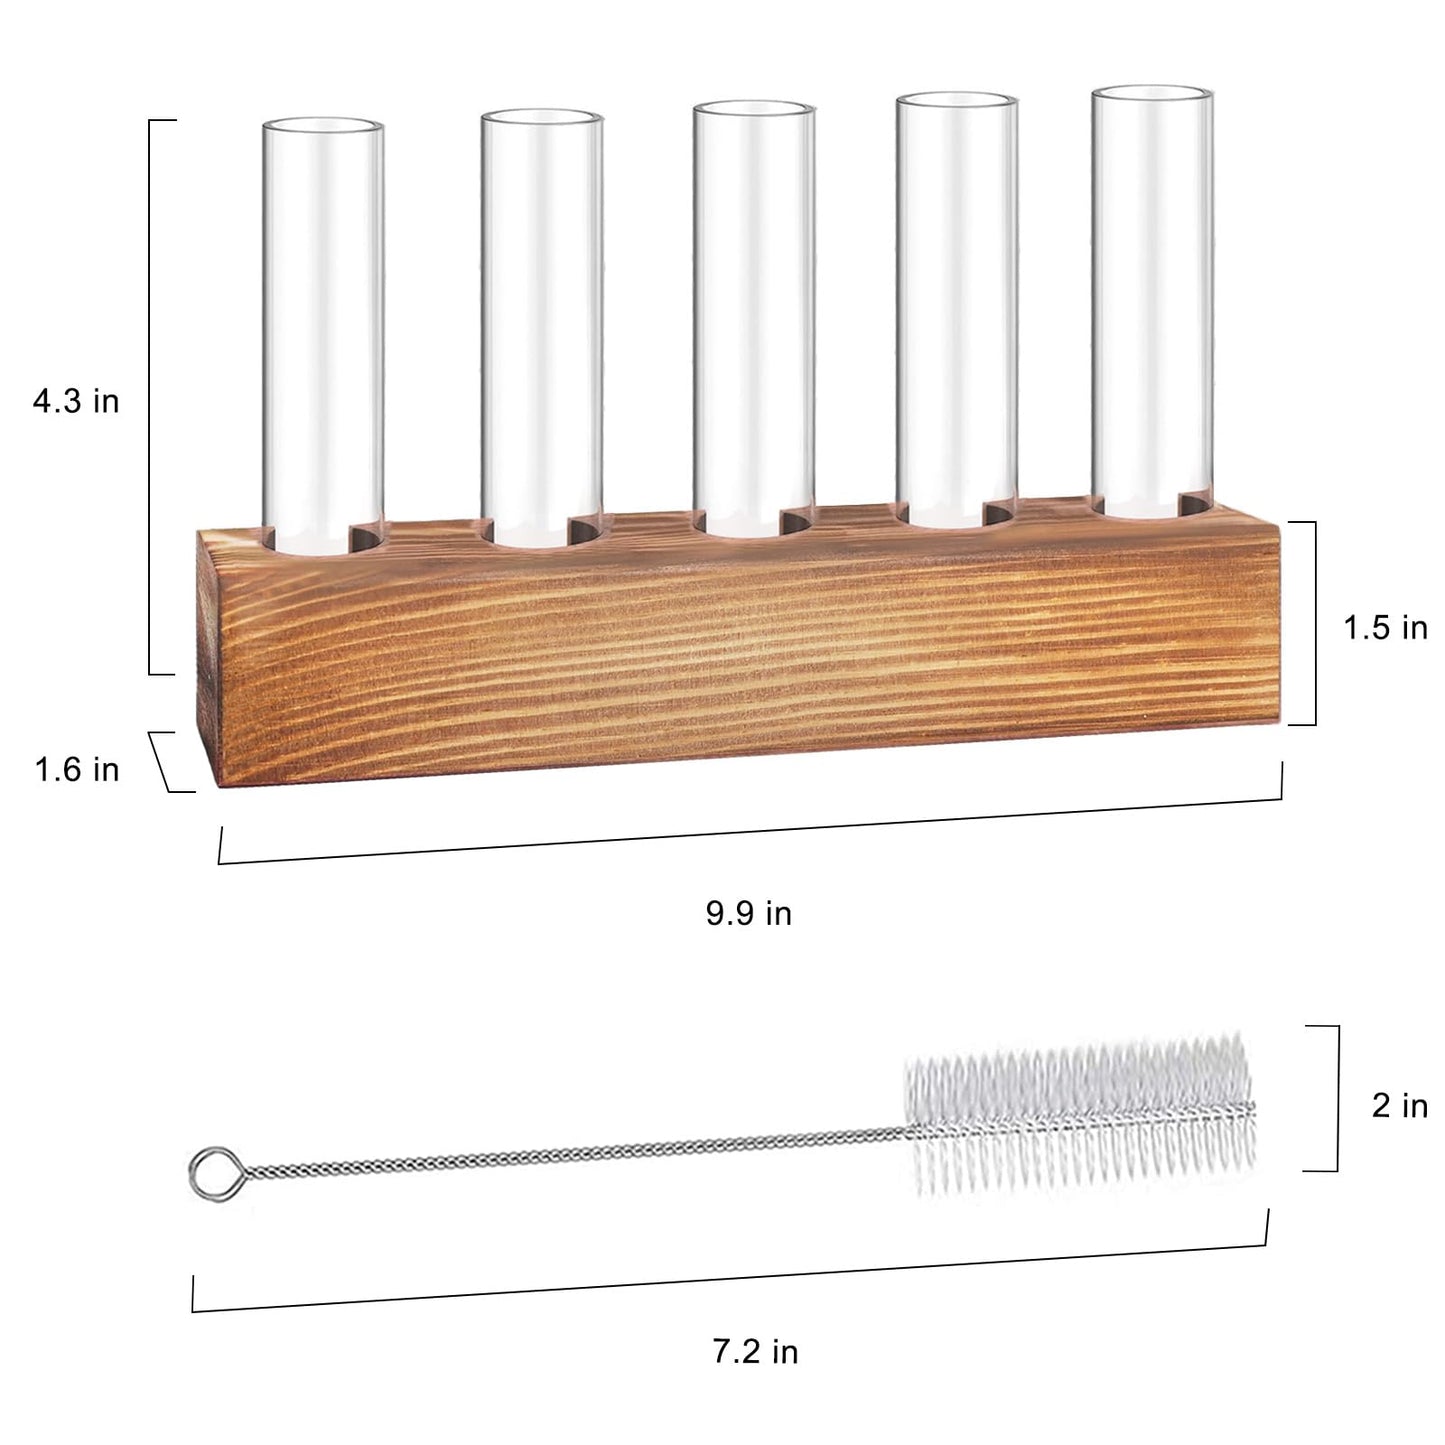 RENMXJ Plant Propagation Station, Plant Terrarium with Wooden Stand for Hydroponics Plants Office Decor Unique Gardening for Women Plant Lovers - 5 Glass Test Tube Vases